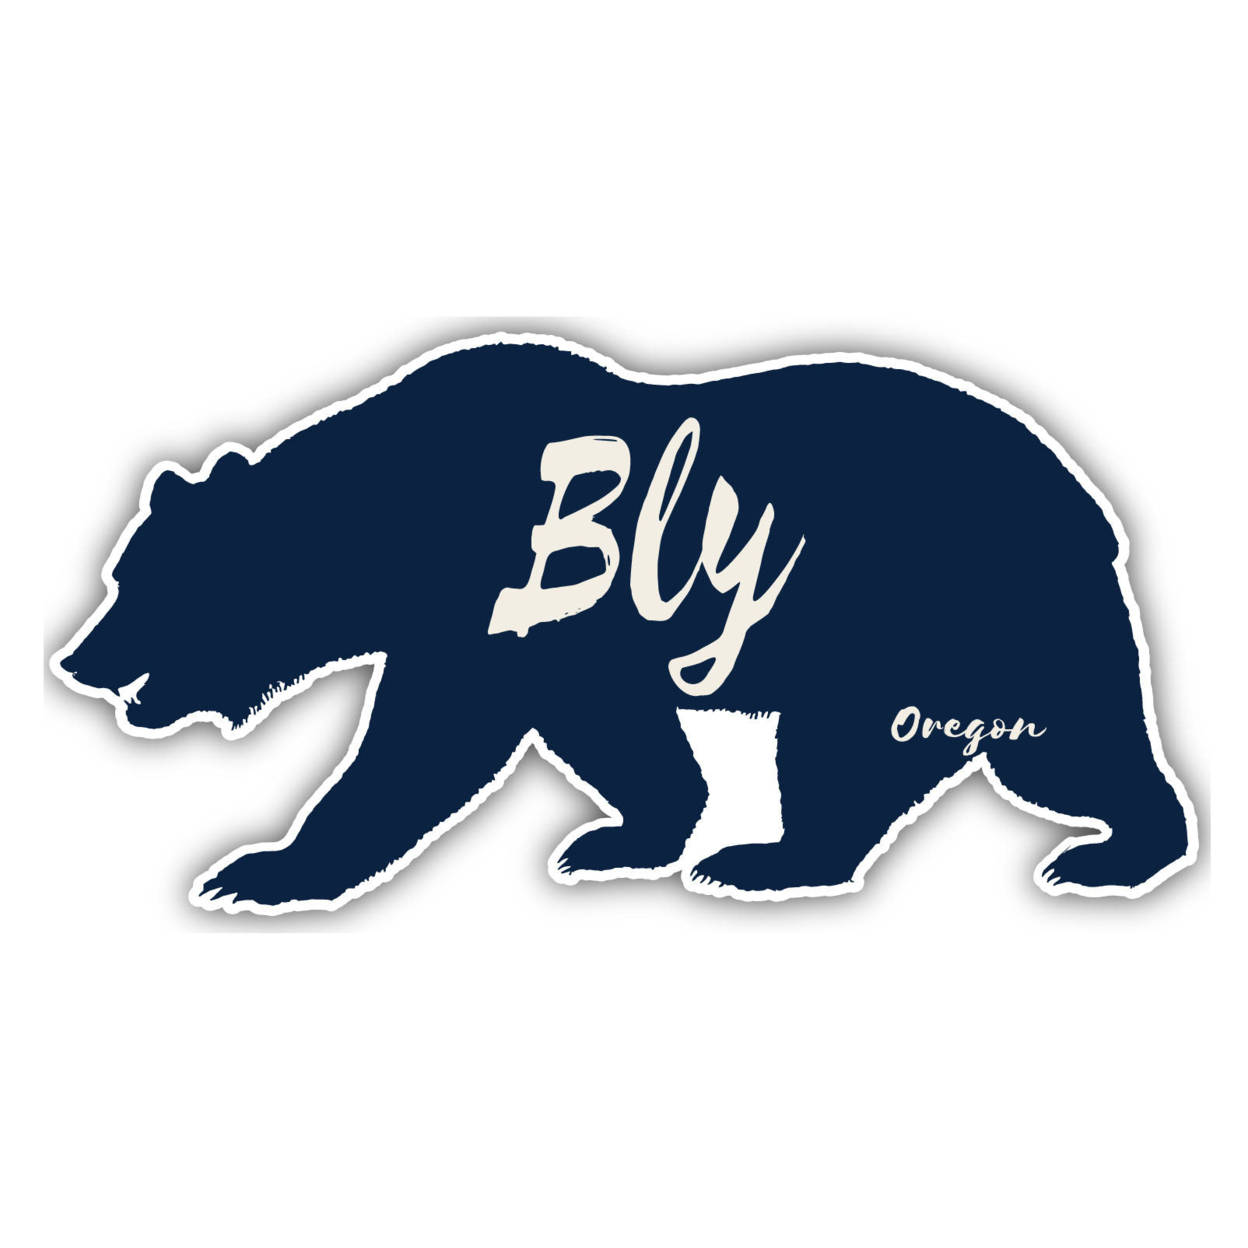 Bly Oregon Souvenir Decorative Stickers (Choose Theme And Size) - 4-Pack, 2-Inch, Bear